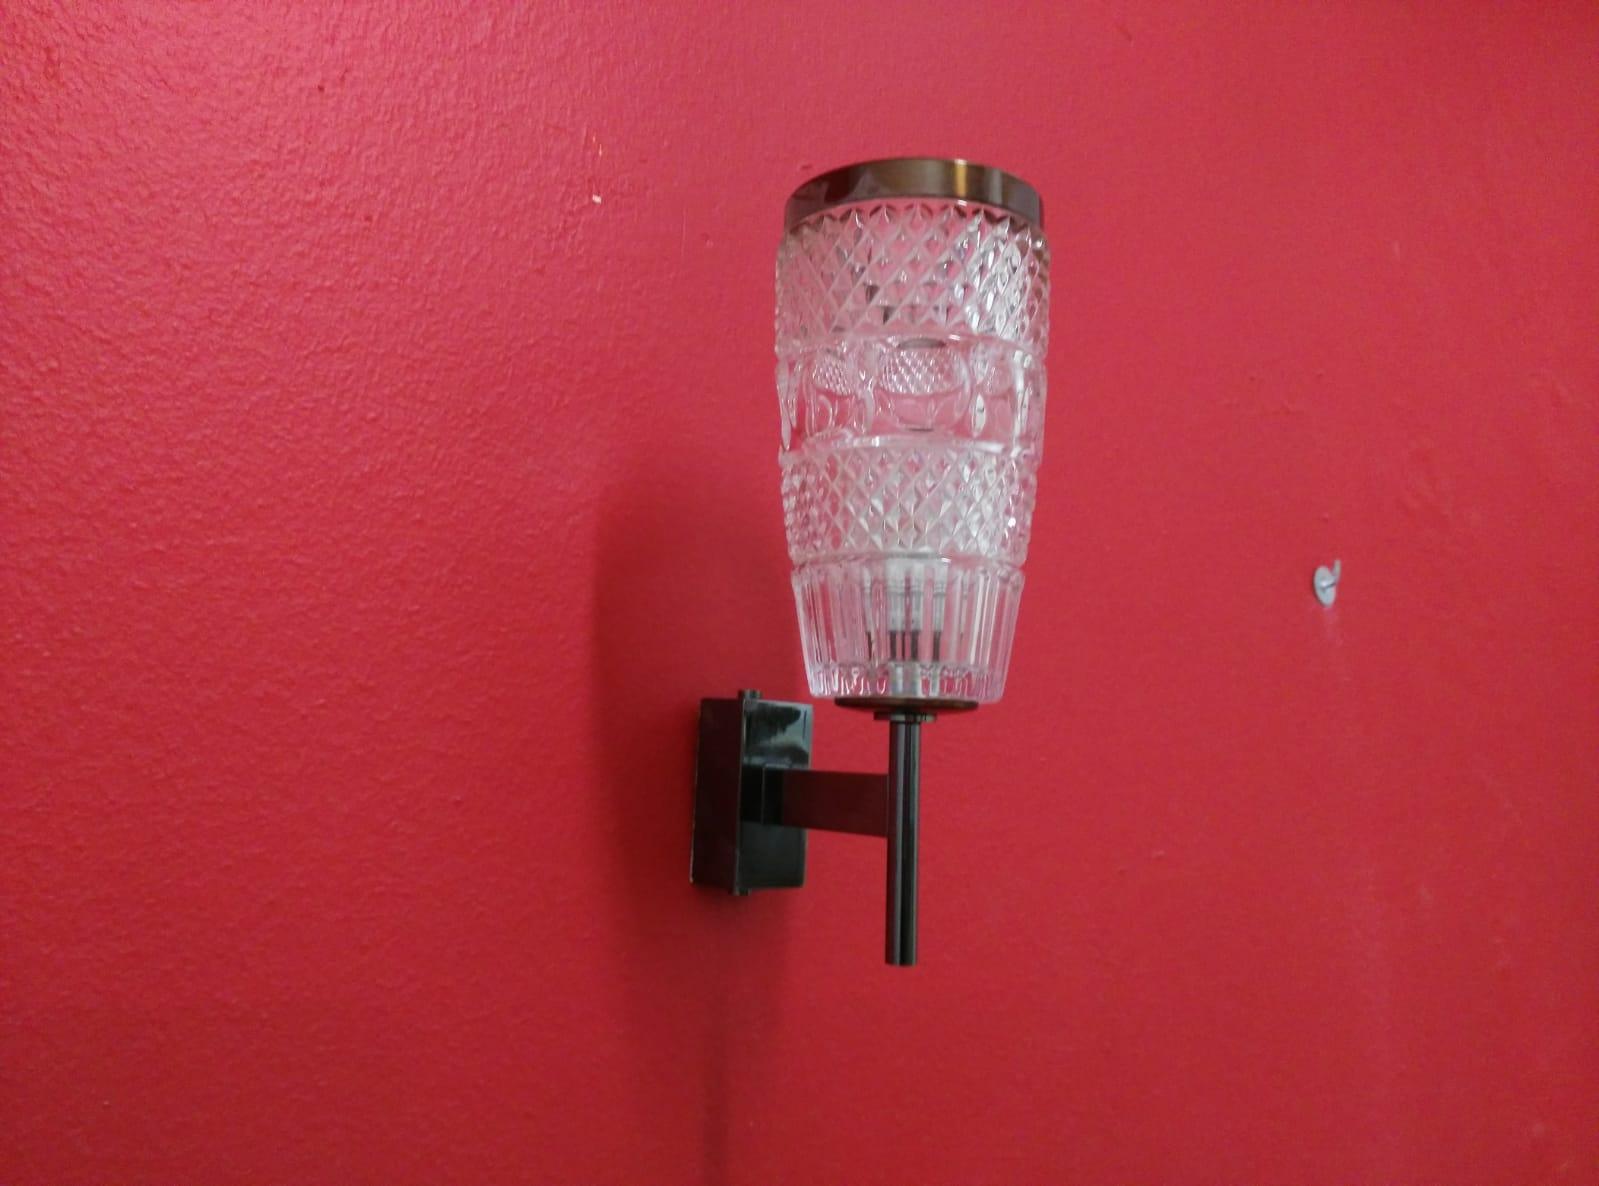 Mid-Century Modern midcenturyPair of Glass and Steel Wall Lamps, Italian Style, 1950s For Sale